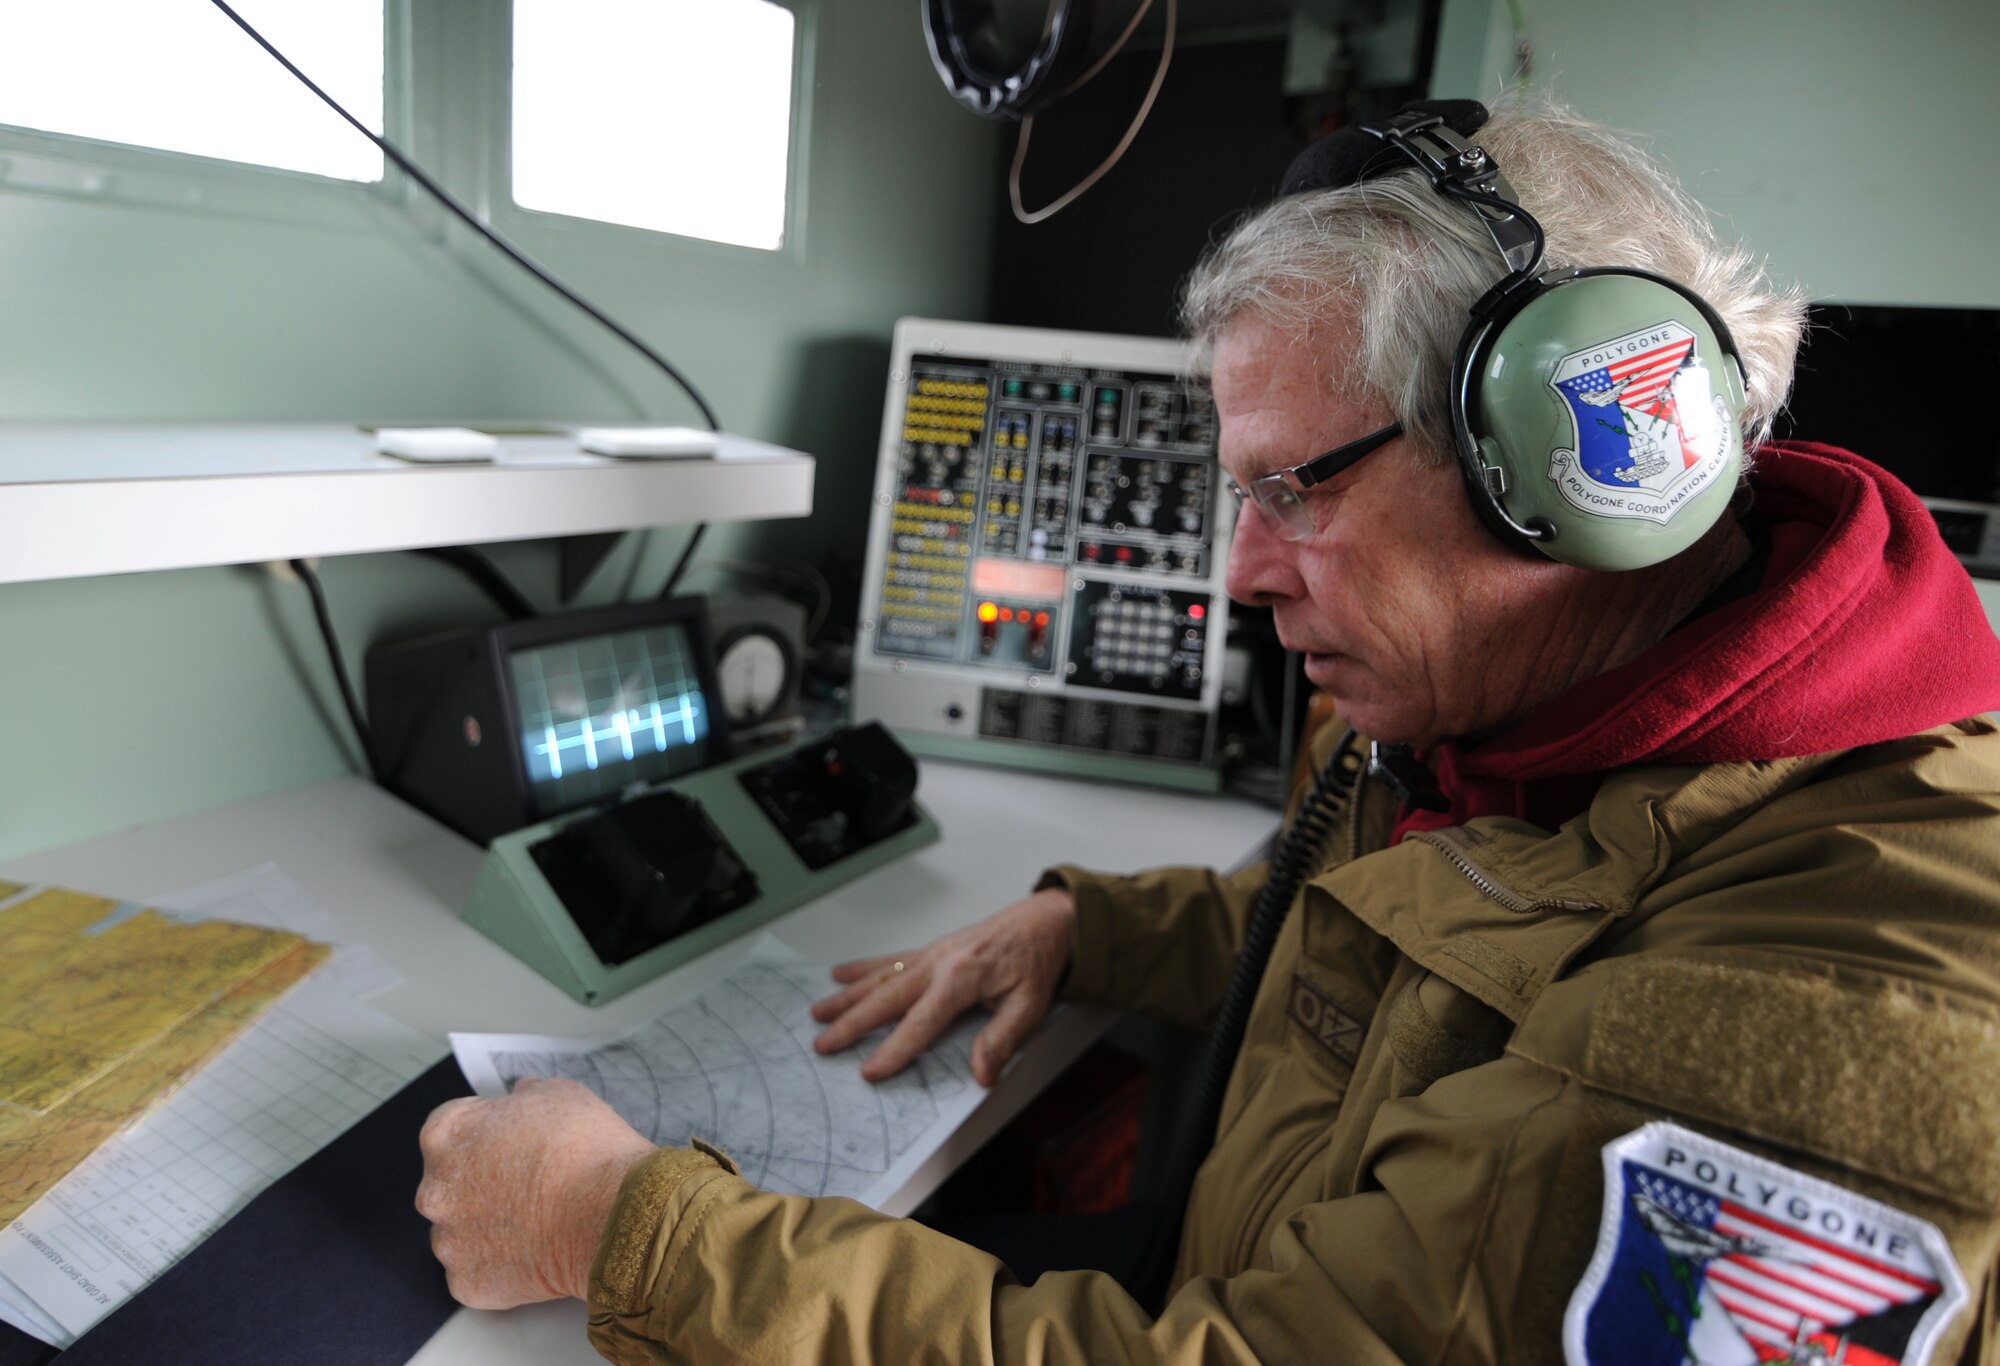 KONYA, Turkey – Jack Graham, Polygone radar technician, reviews a map of the surrounding area inside a tactical radar threat generator during Anatolian Falcon 2012 in Konya, Turkey, March 8. Graham operated the radar, tracking participating aircraft in the exercise, to provide a simulated ground threat capability. (U.S. Air Force photo/Staff Sgt. Benjamin Wilson)